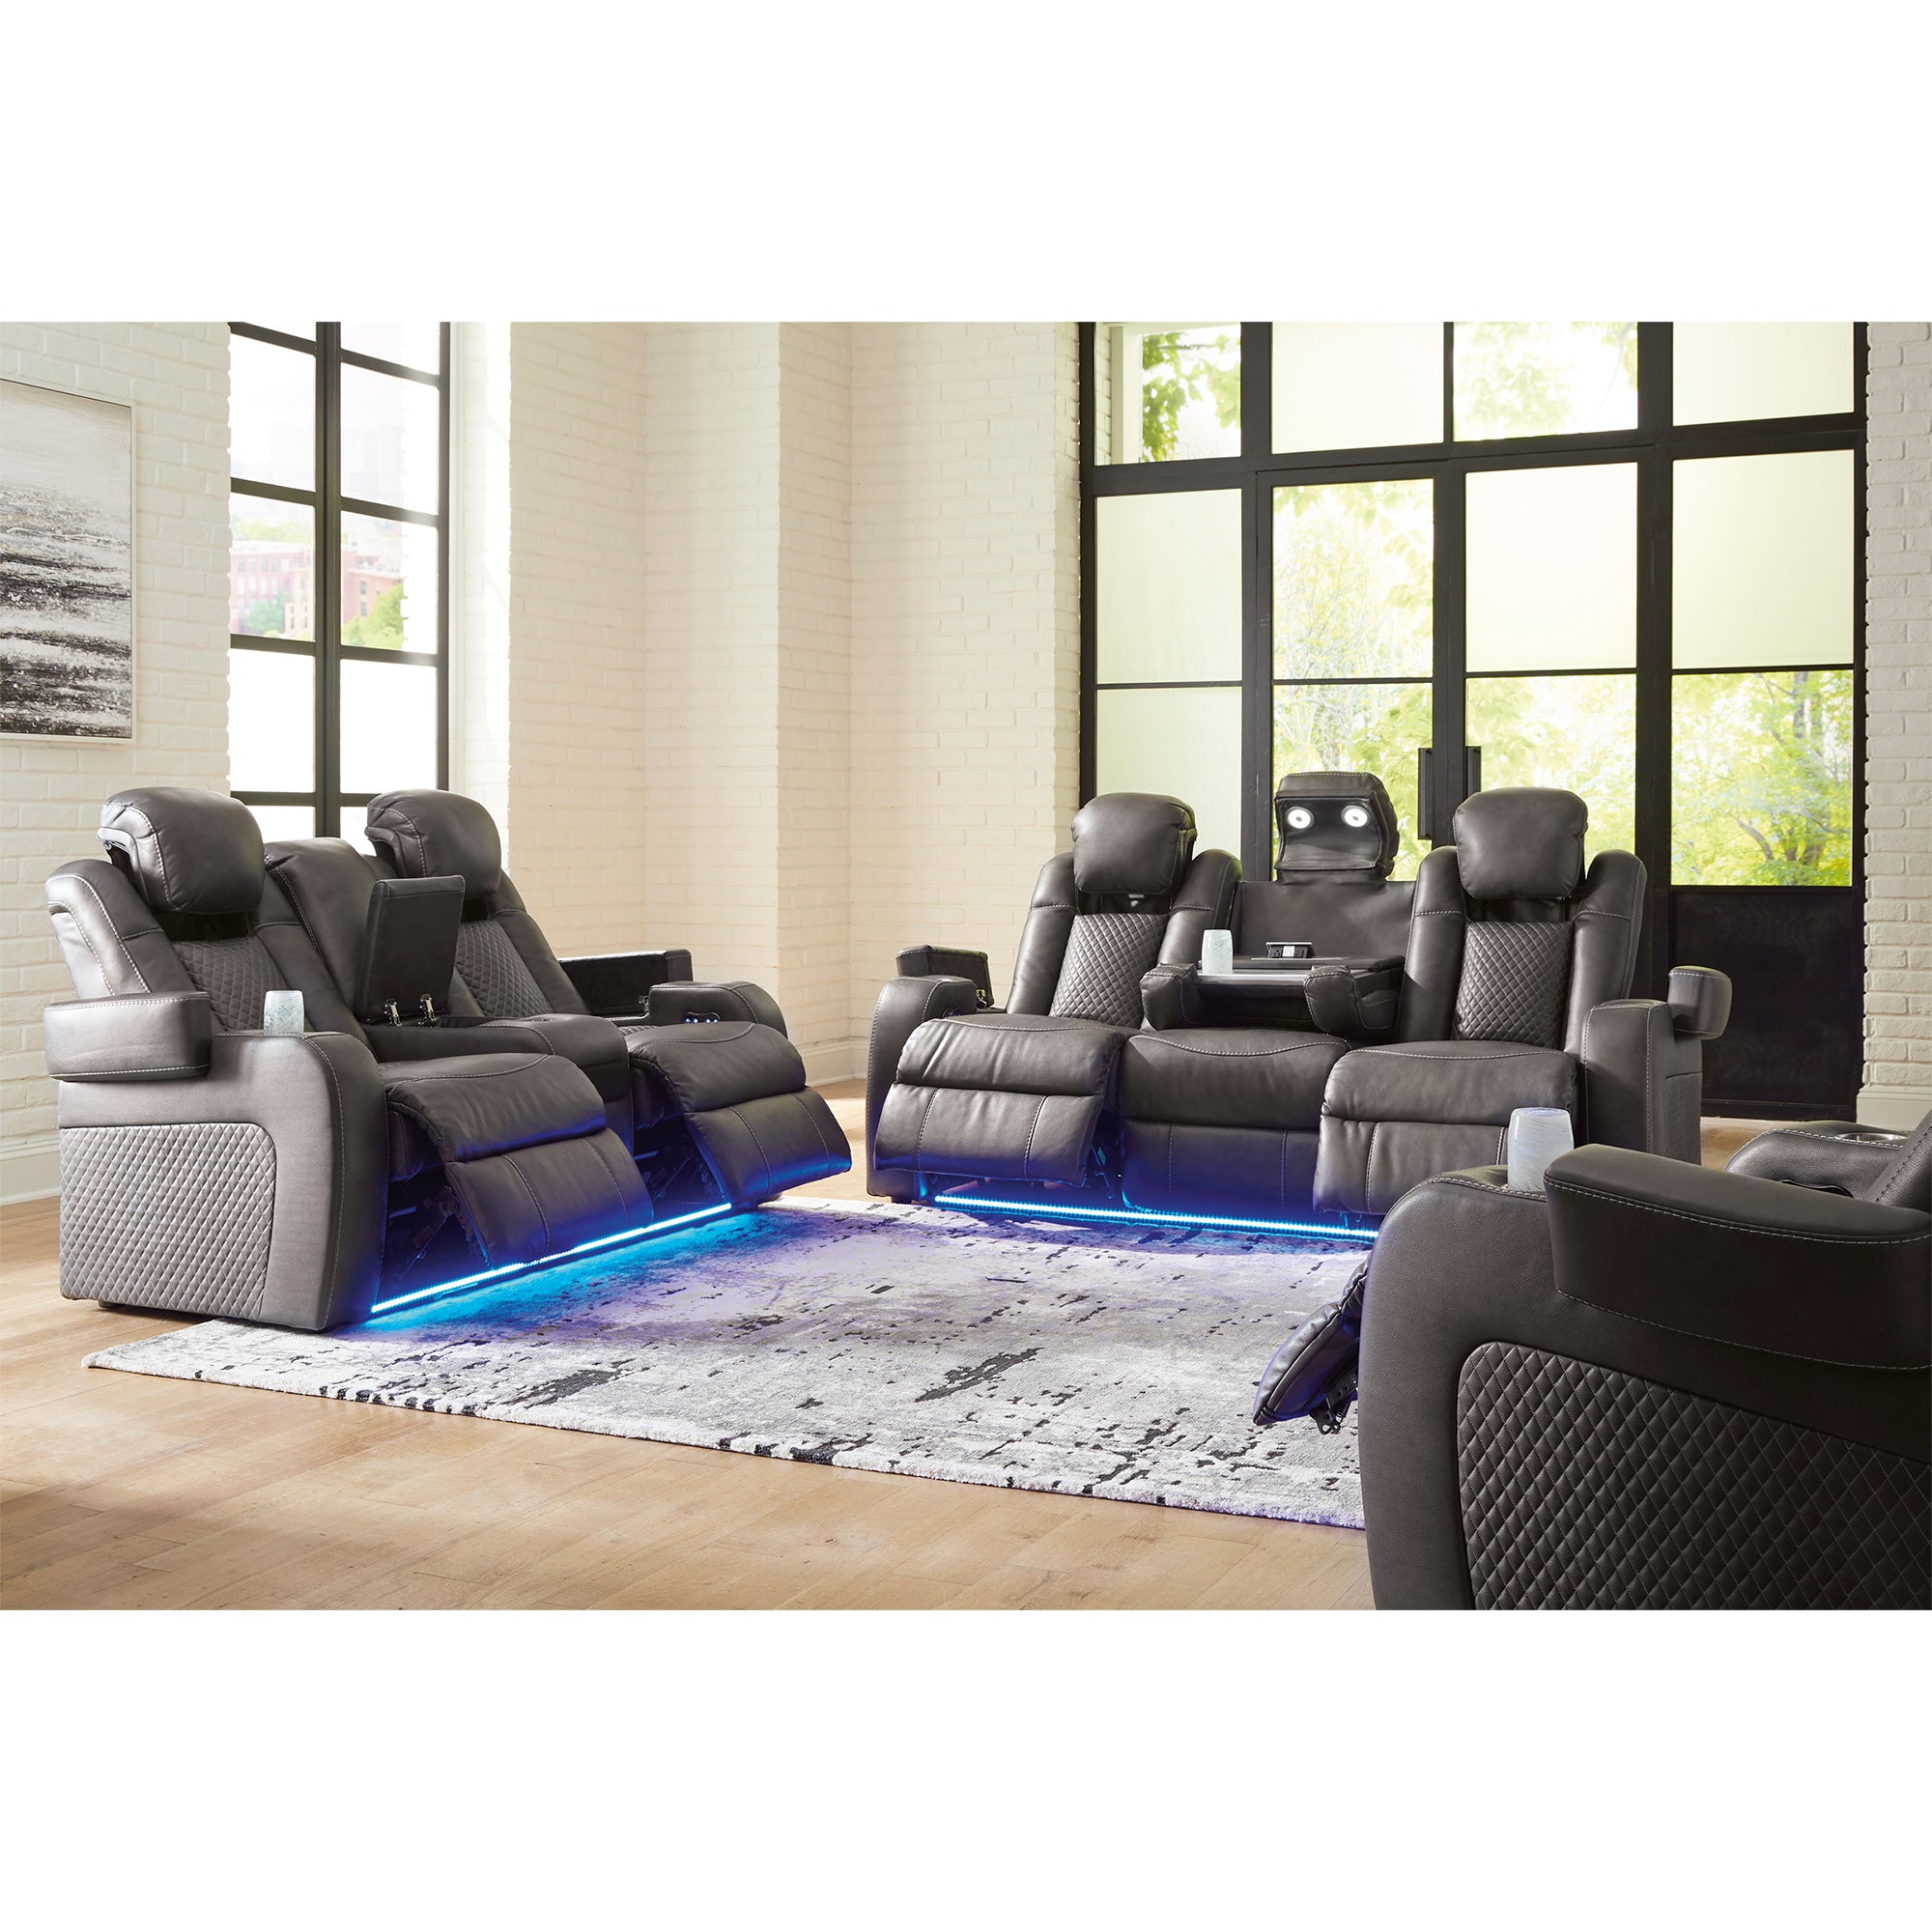 Fyne-Dyme Dual Power Reclining Loveseat with Console